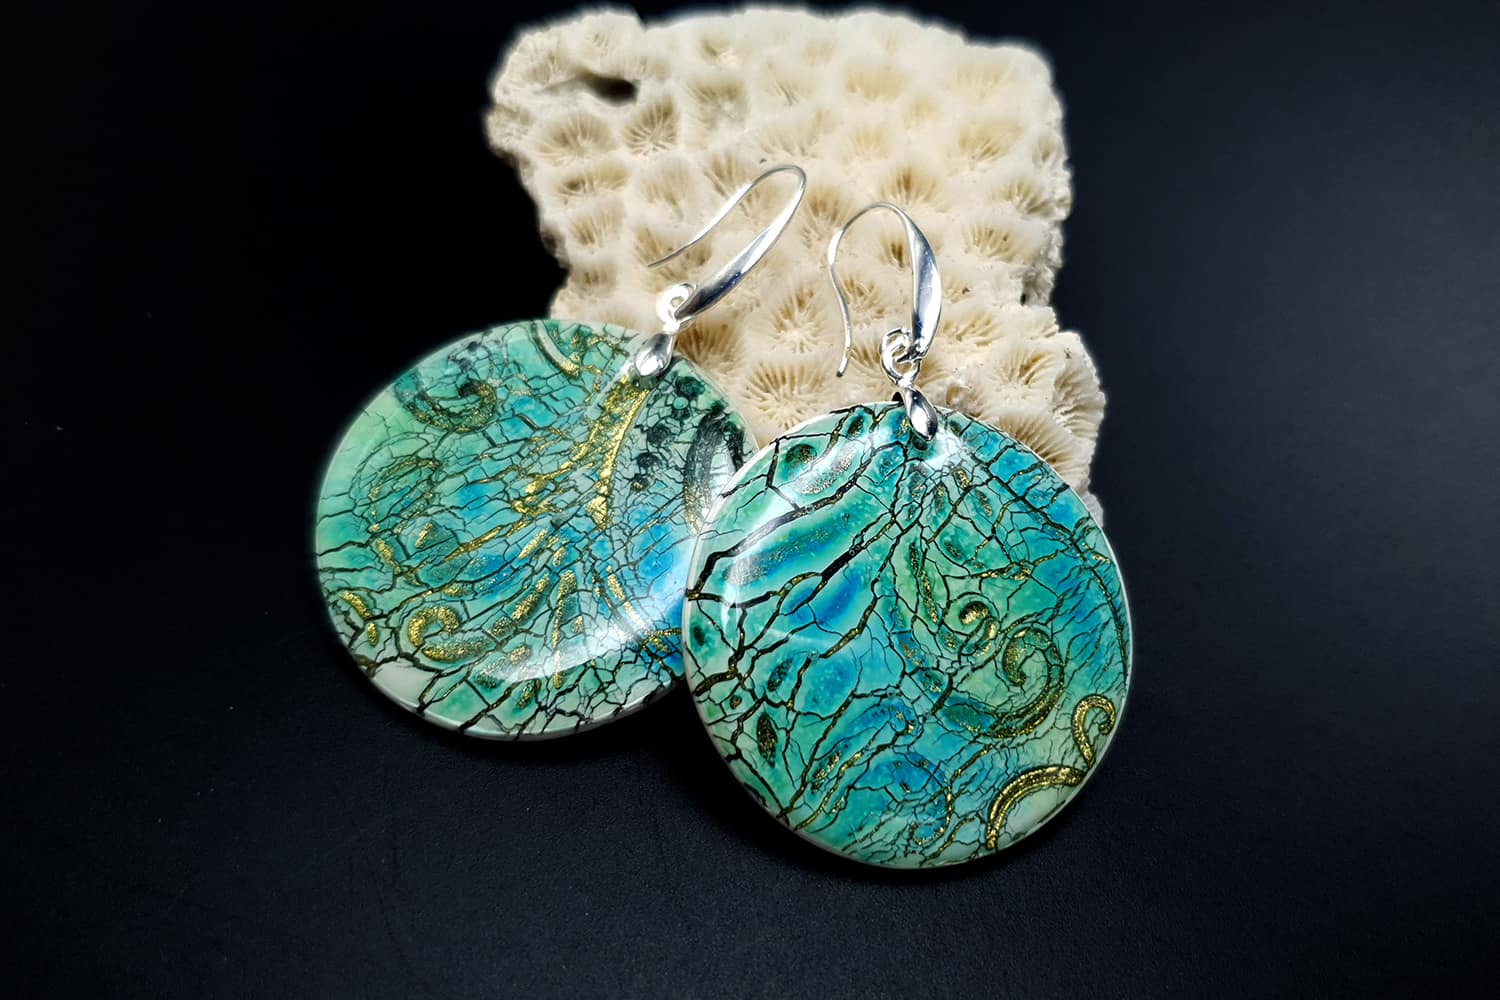 Jewelry from "Faux Glazed Cracked Ceramic" course for your inspiration #5